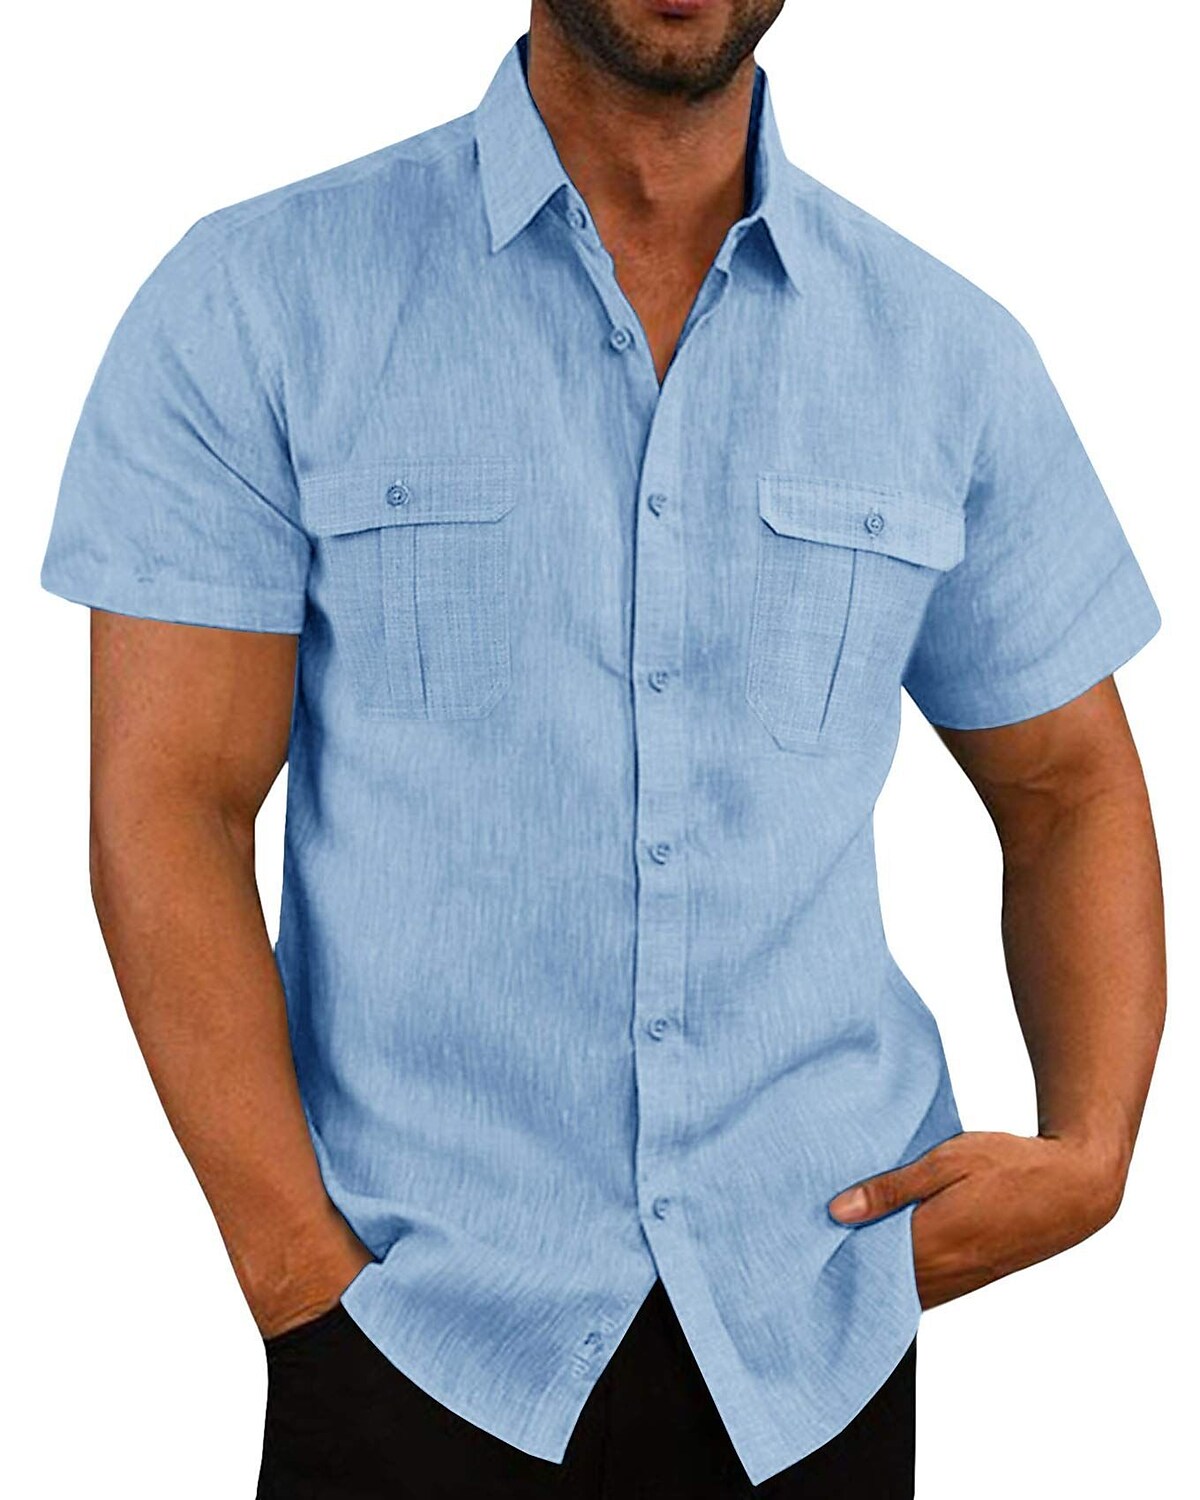 Men's Shirt Striped Turndown Street Casual Button-Down Short Sleeve Tops Casual Fashion Breathable Comfortable Blue